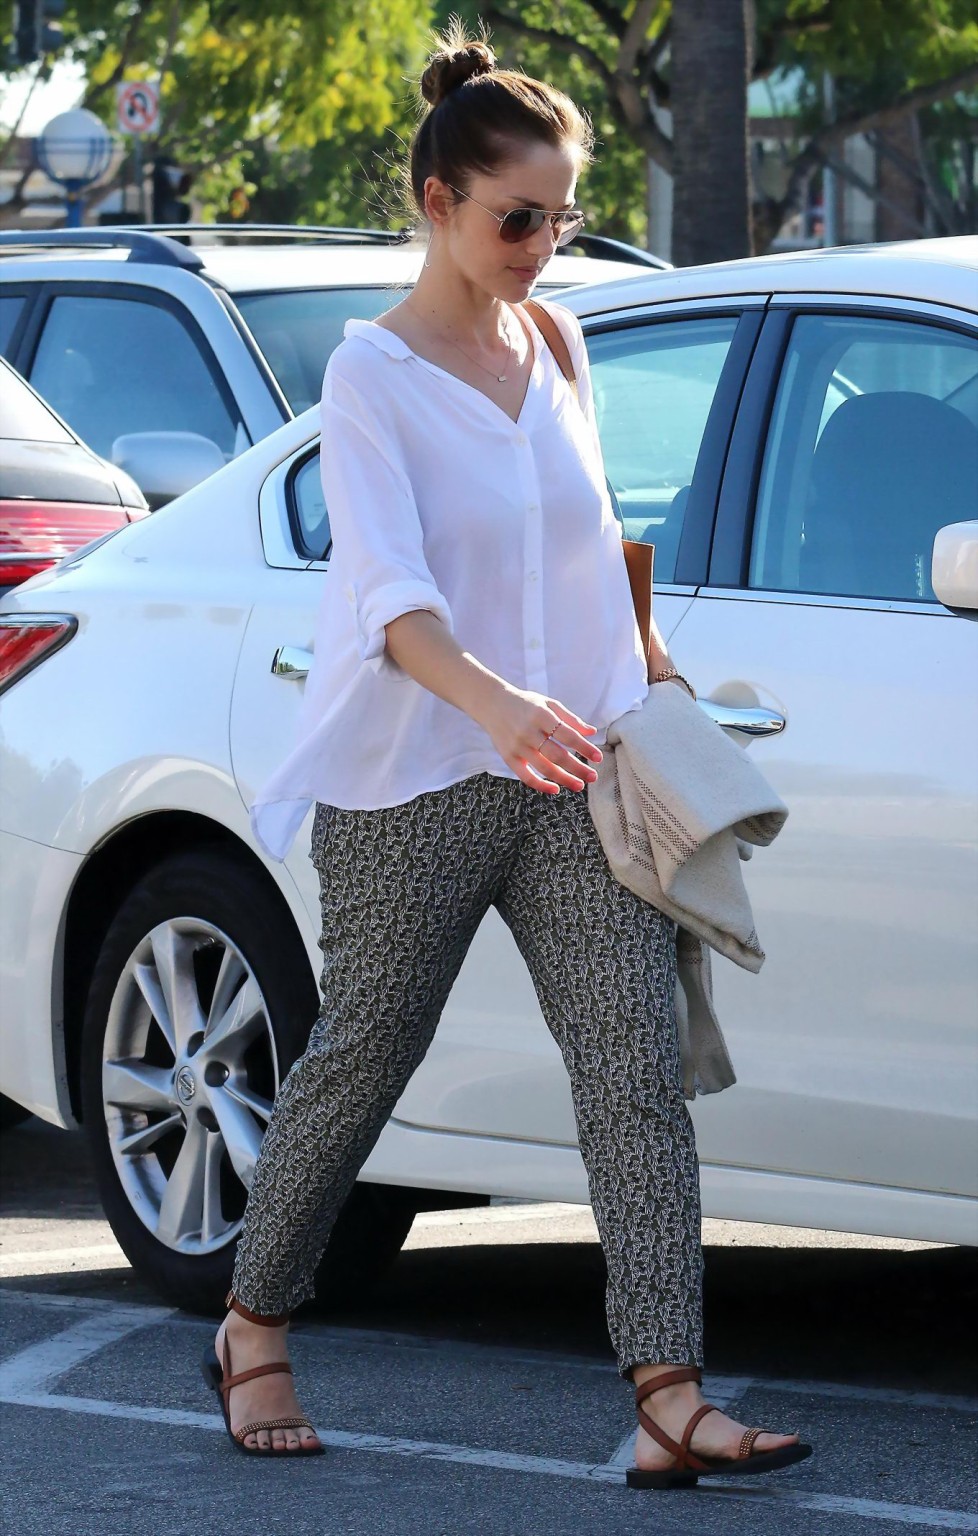 Minka Kelly showing pokies in white slightly transparent shirt while shopping in #75170670